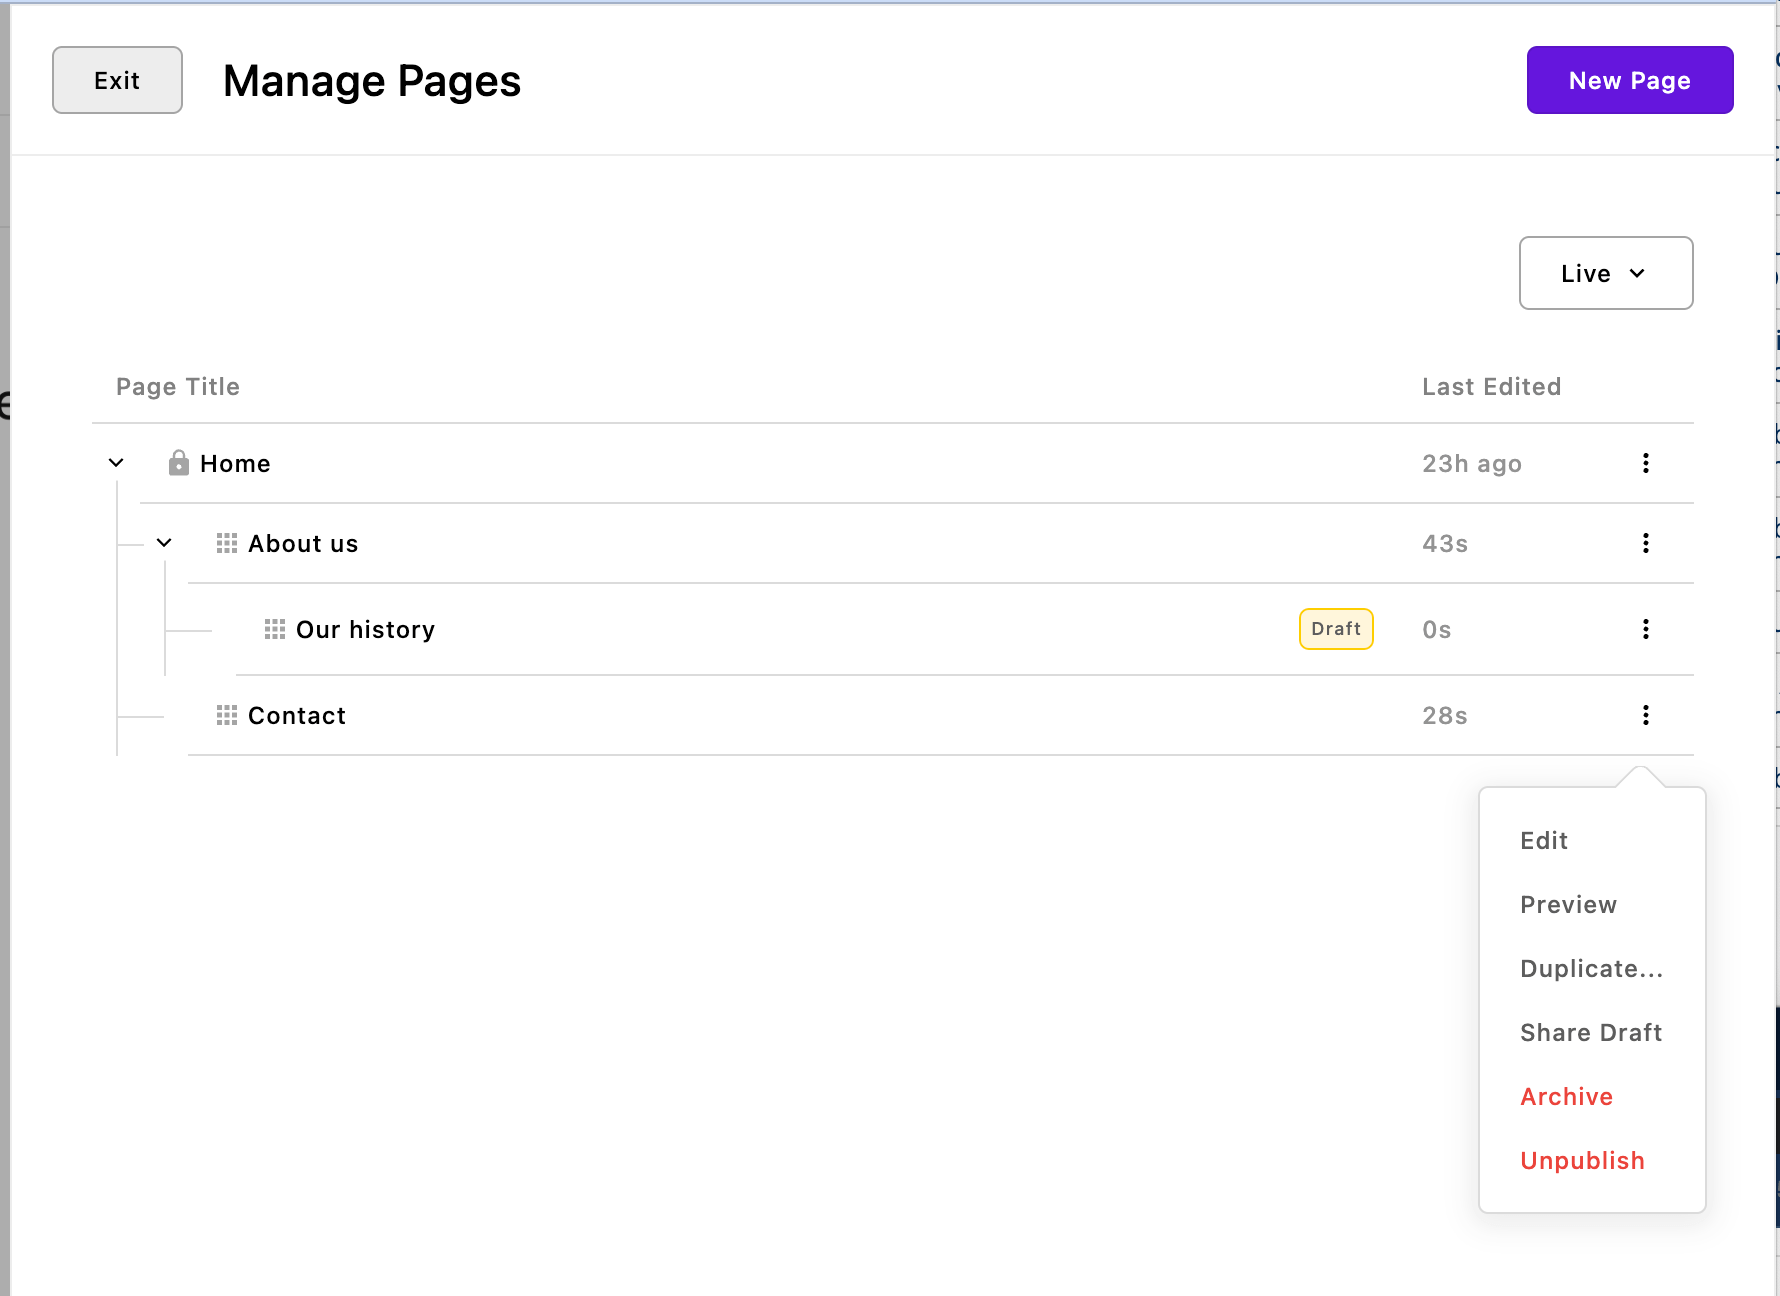 A modal interface with pages organized in order and nested under one another